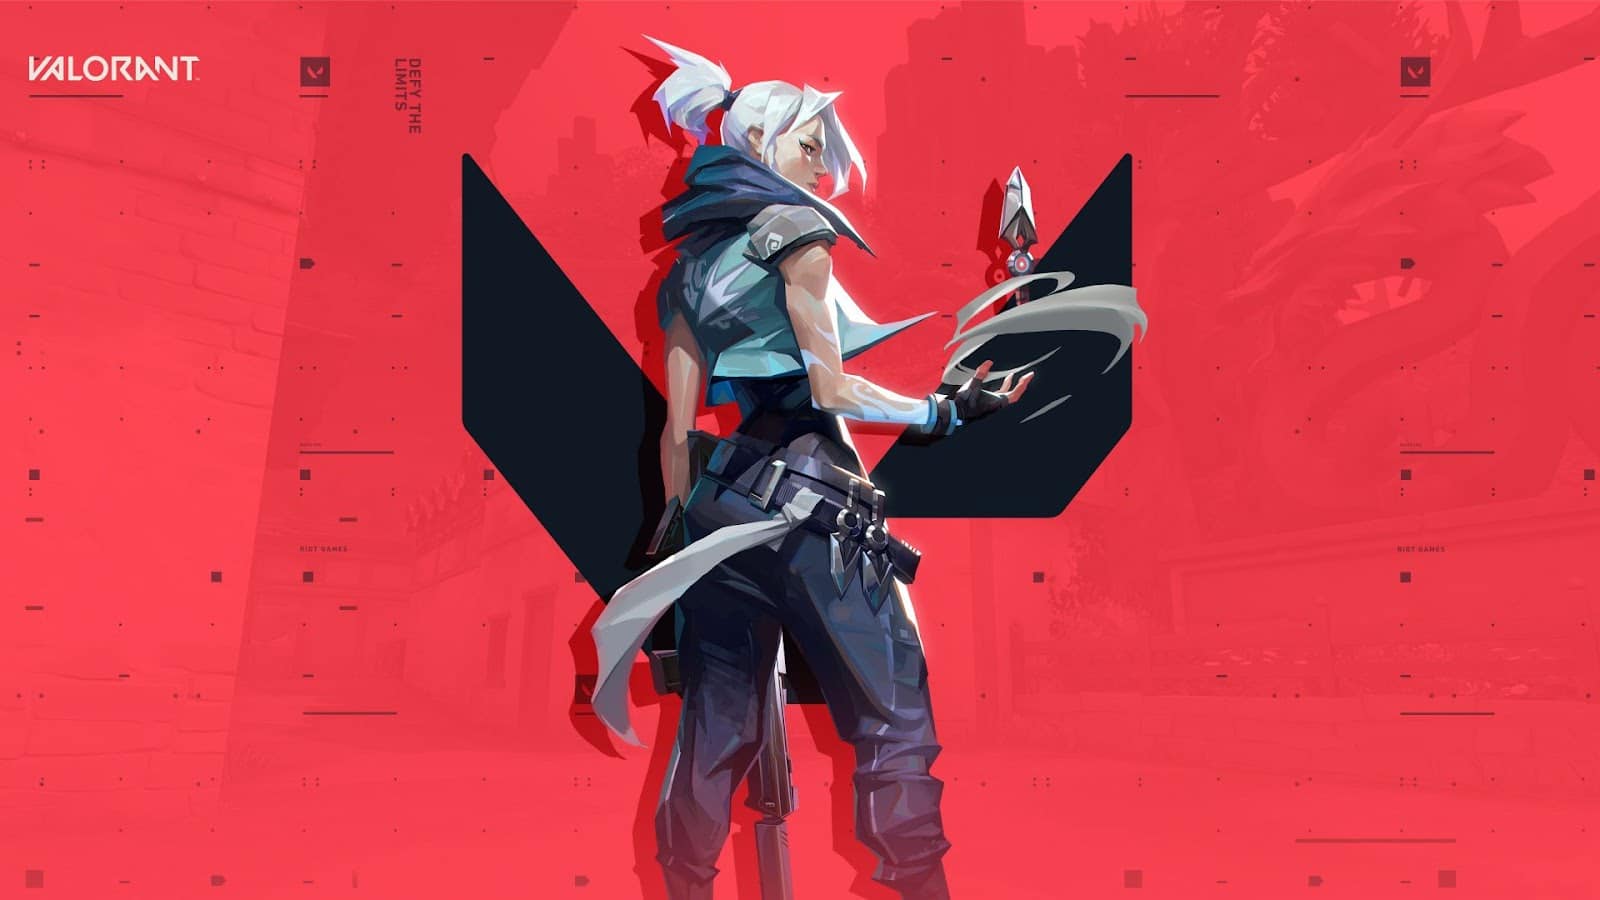 The Jett holds a knife in the air above her hand. The stylized letter V from the Valorant logo appears spray painted on the red wall behind her